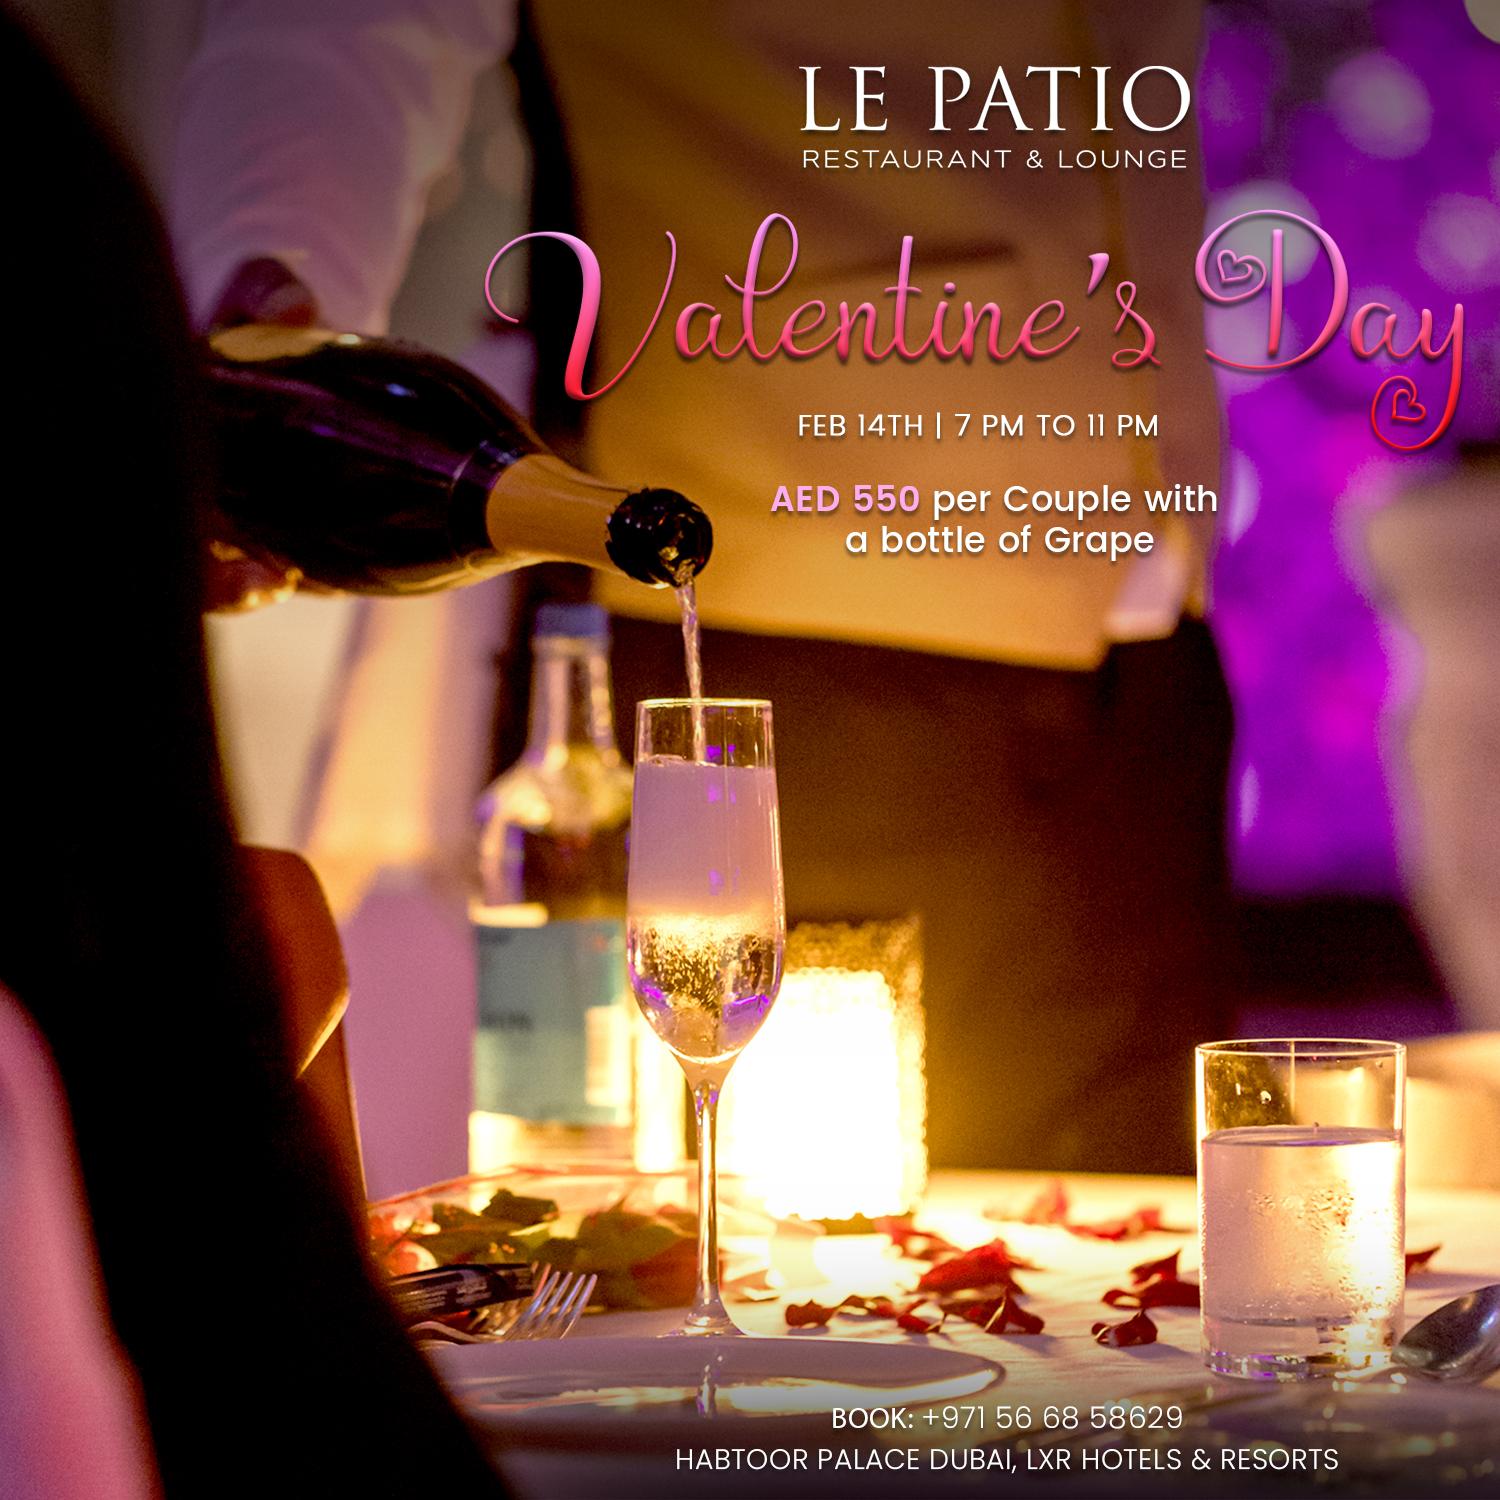 Valentine's Day at Le Patio